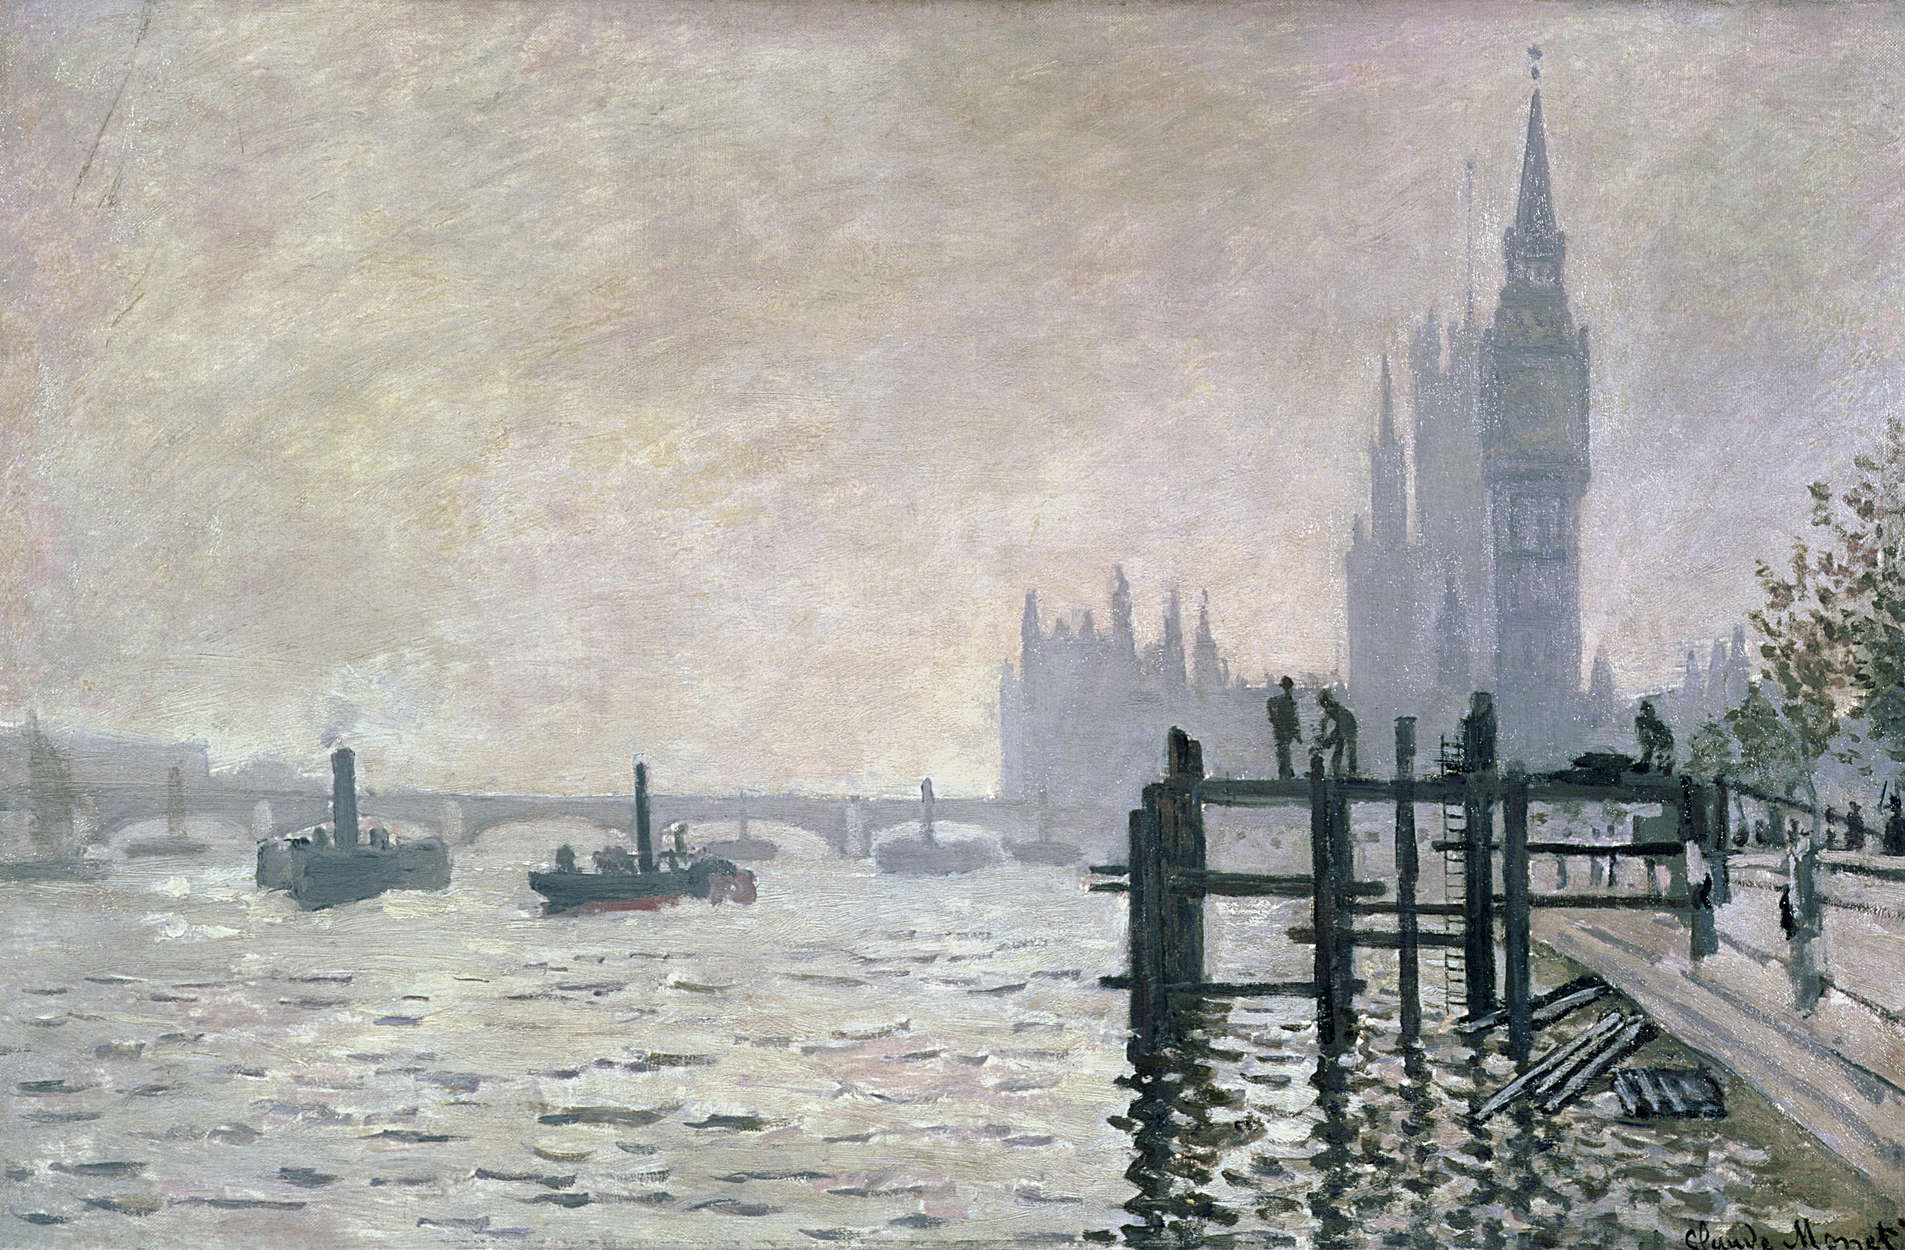             Photo wallpaper "The Thames below Westminster" by Claude Monet
        